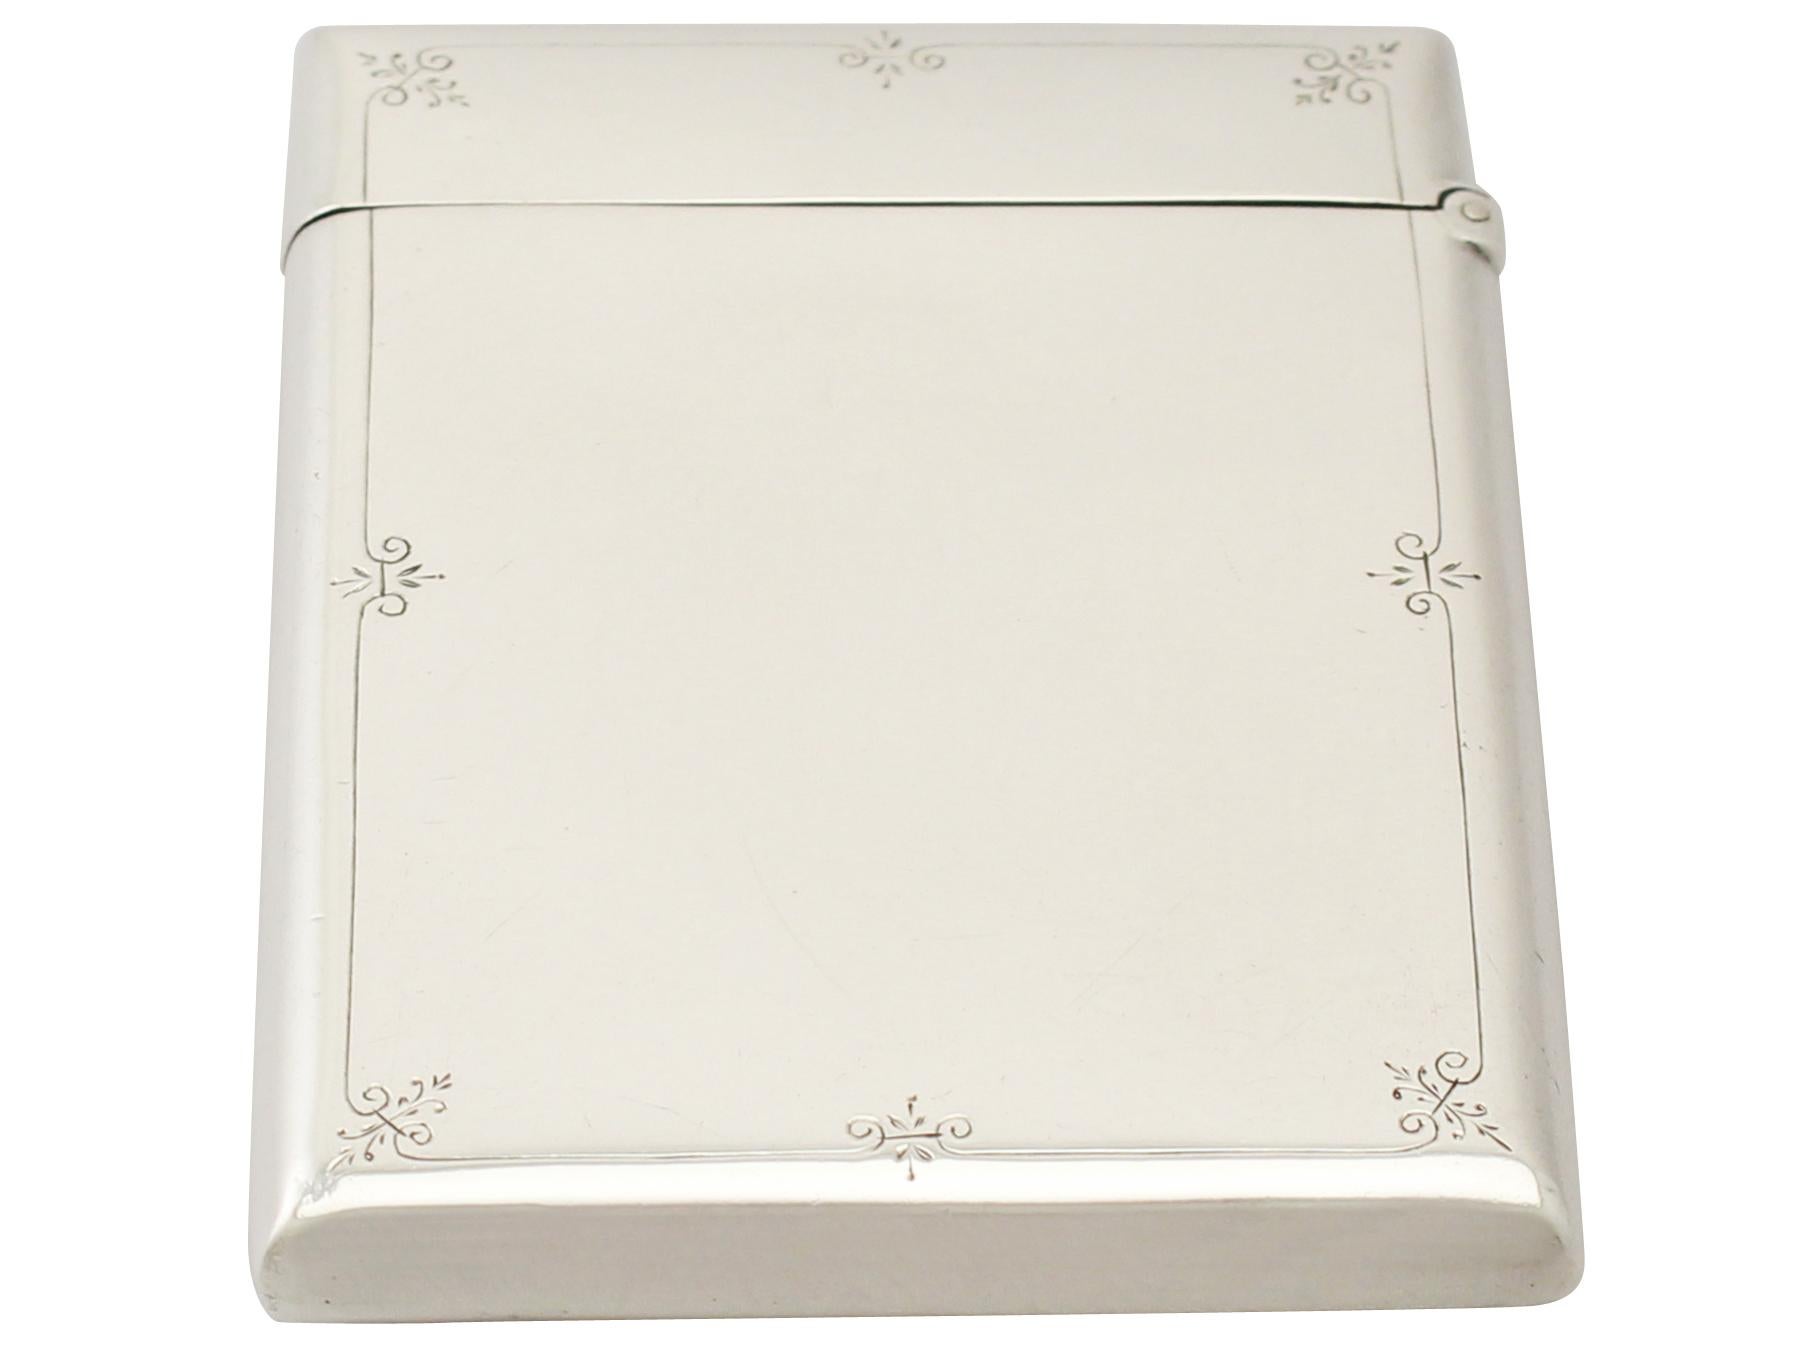 An exceptional, fine and impressive antique Victorian English sterling silver card case made in the Aesthetic style; an addition to our range of silver boxes and cases.

This exceptional antique sterling silver card case has a rectangular form